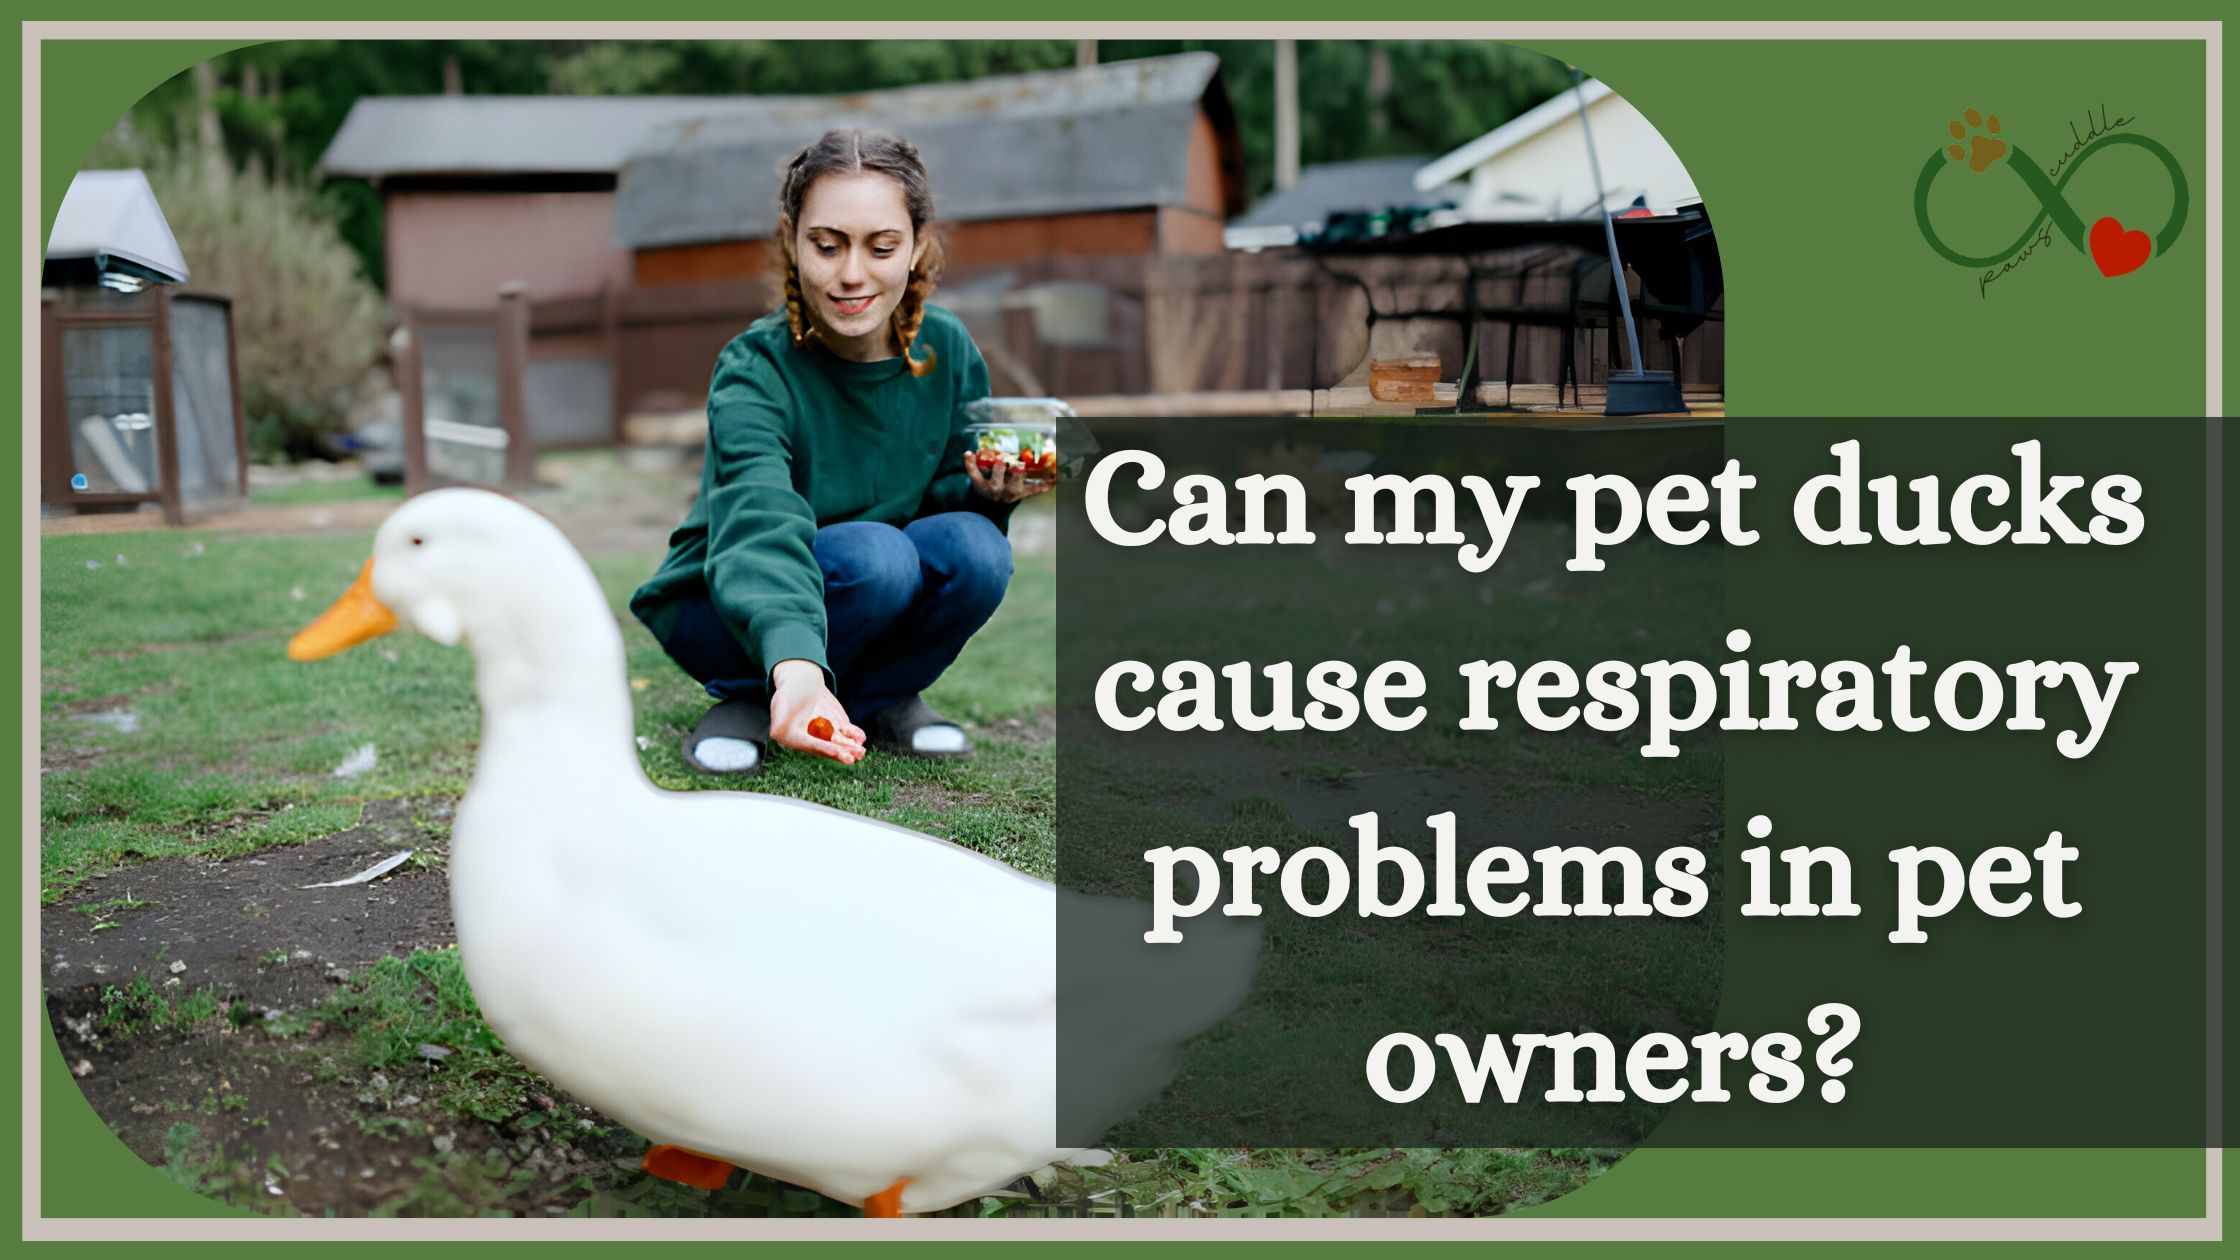 Can my pet ducks cause respiratory problems in pet owners?